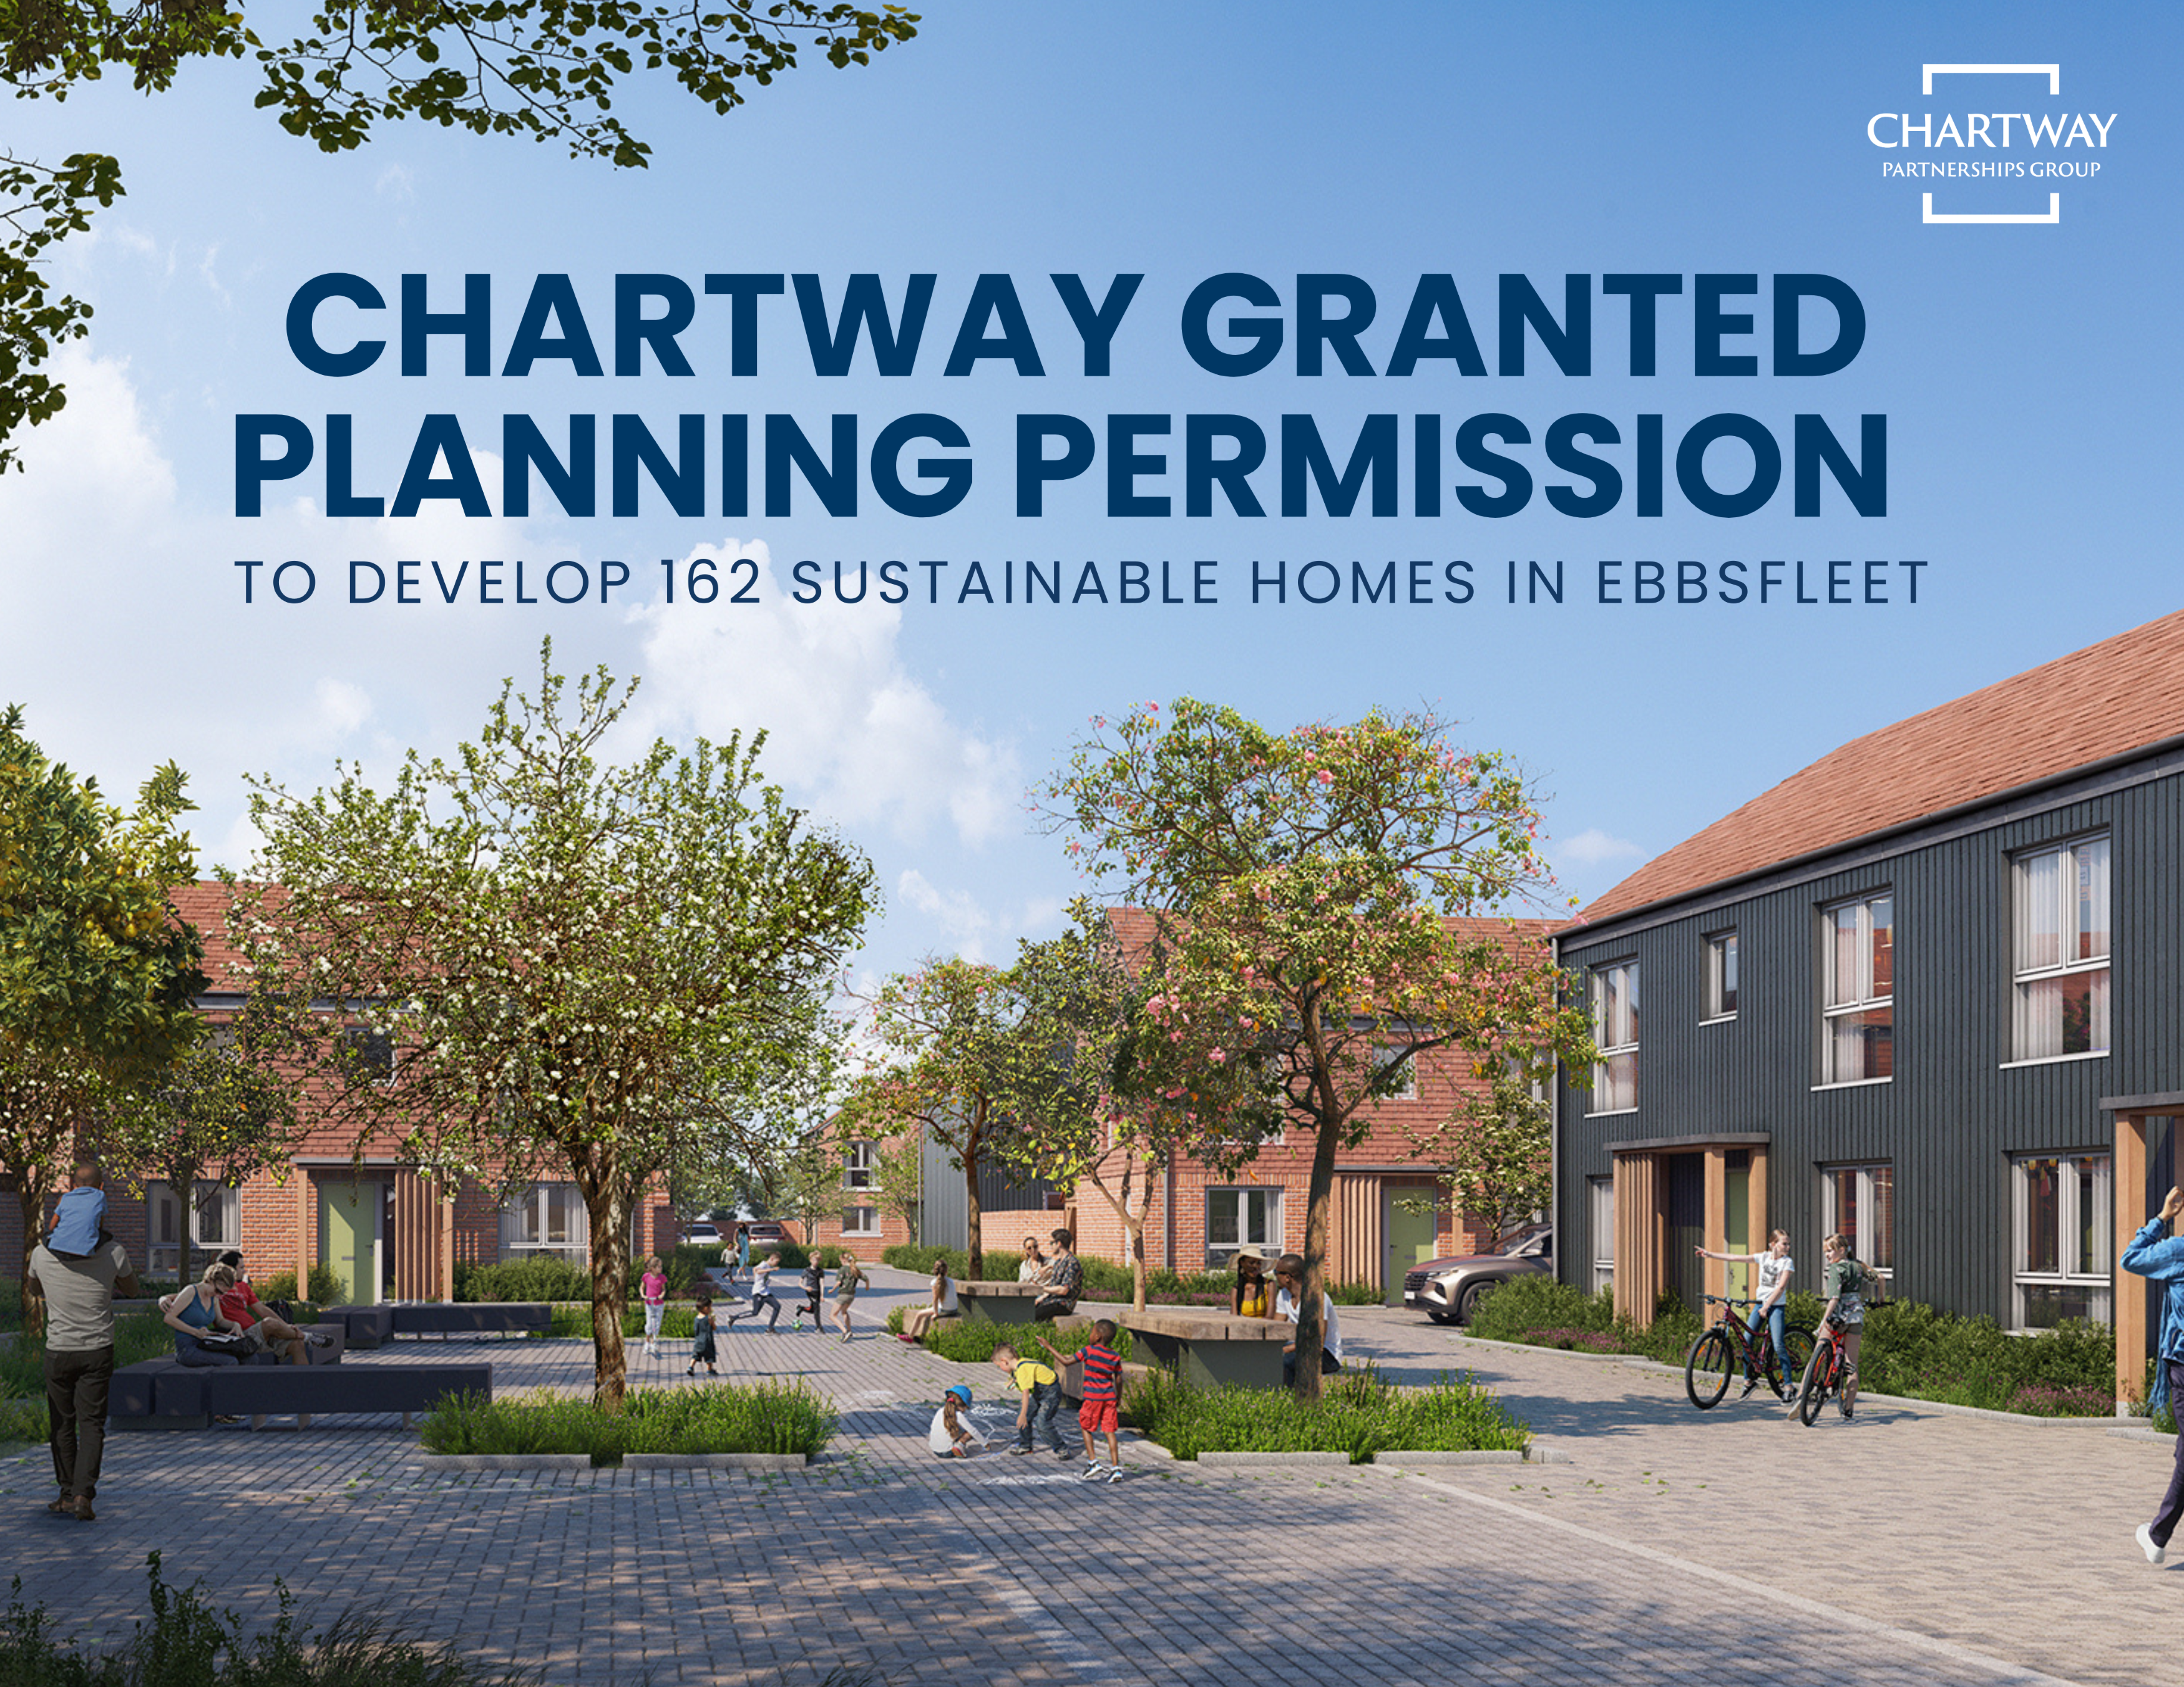 Chartway granted planning permission to develop 162 sustainable homes in Ebbsfleet